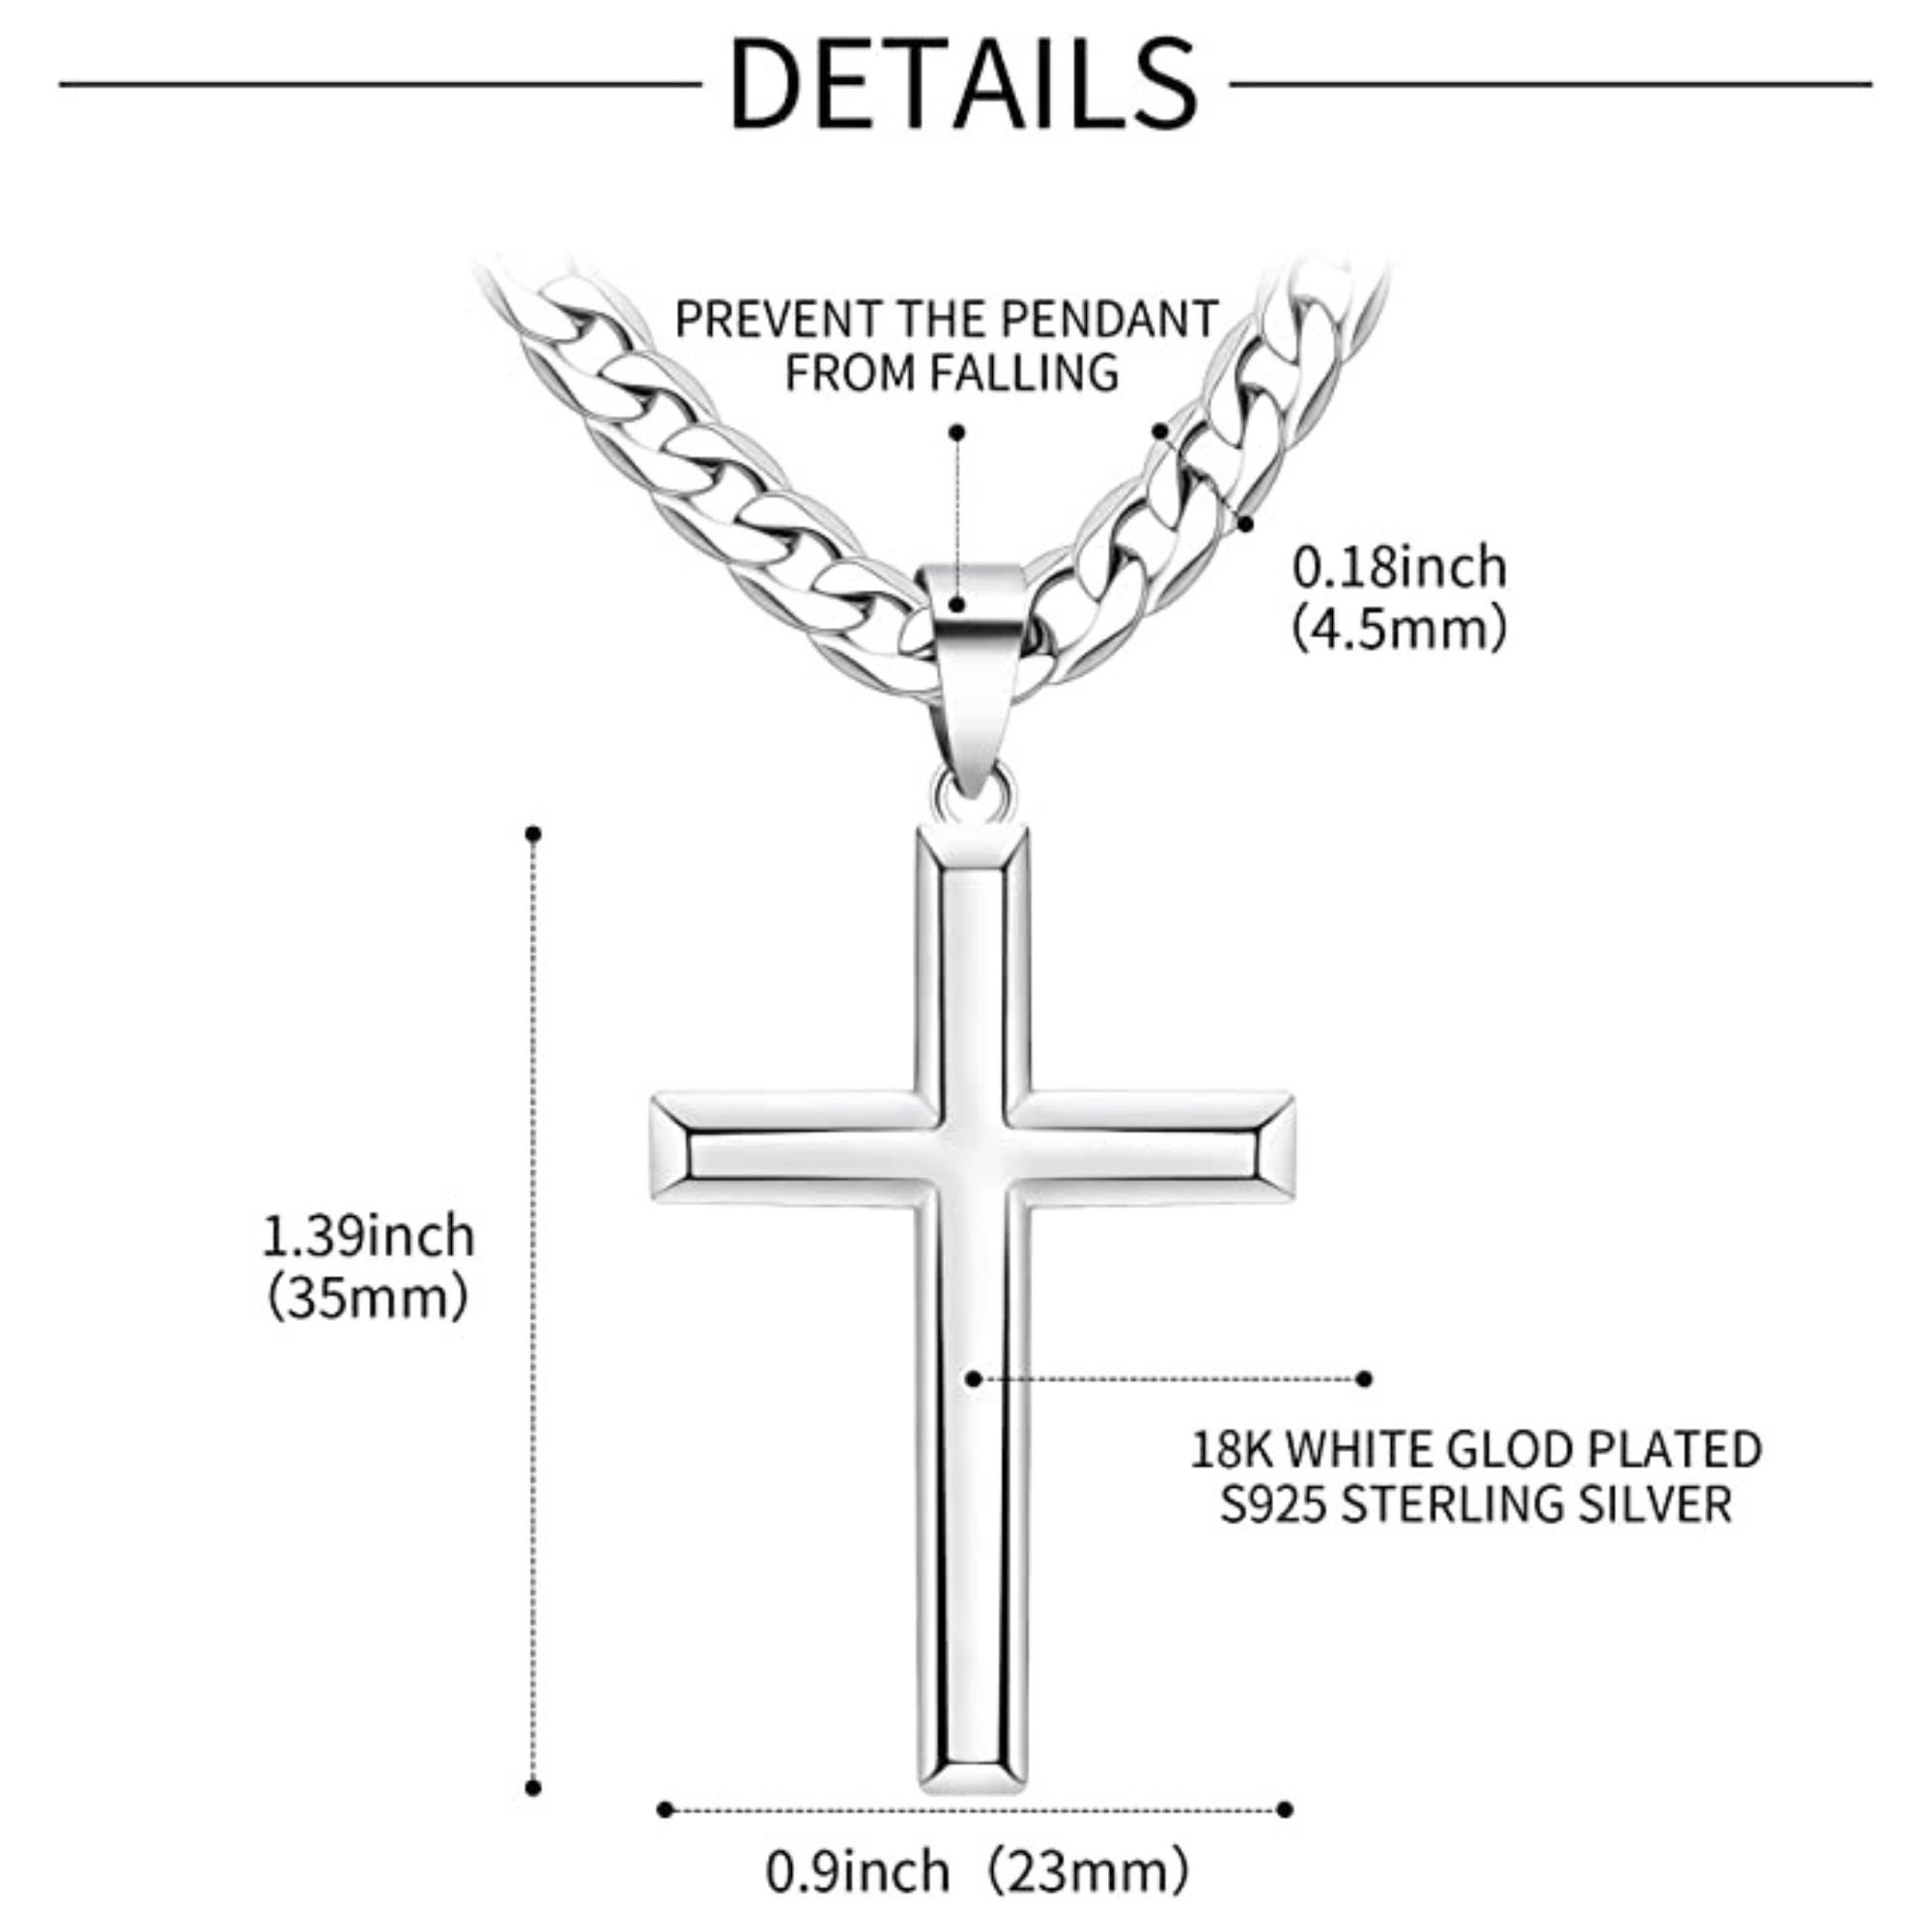 Rnivida 925 Sterling Silver Cross Pendant Necklace with Stainless Steel Wheat Chain for Men - Choice of Lengths